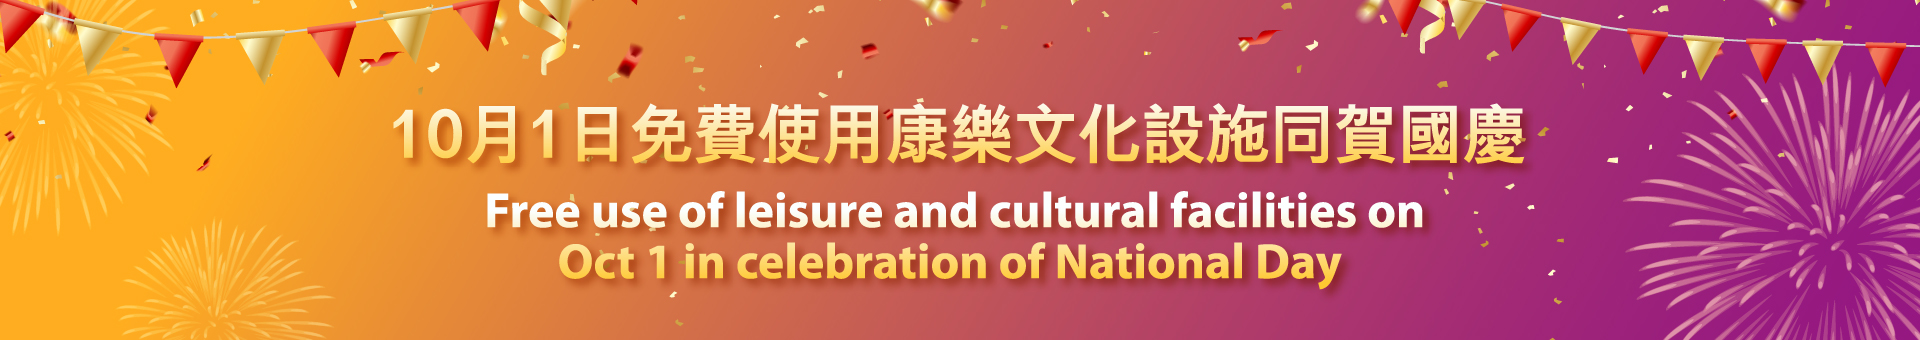 Free use of leisure and cultural facilities on Oct 1 in celebration of National Day